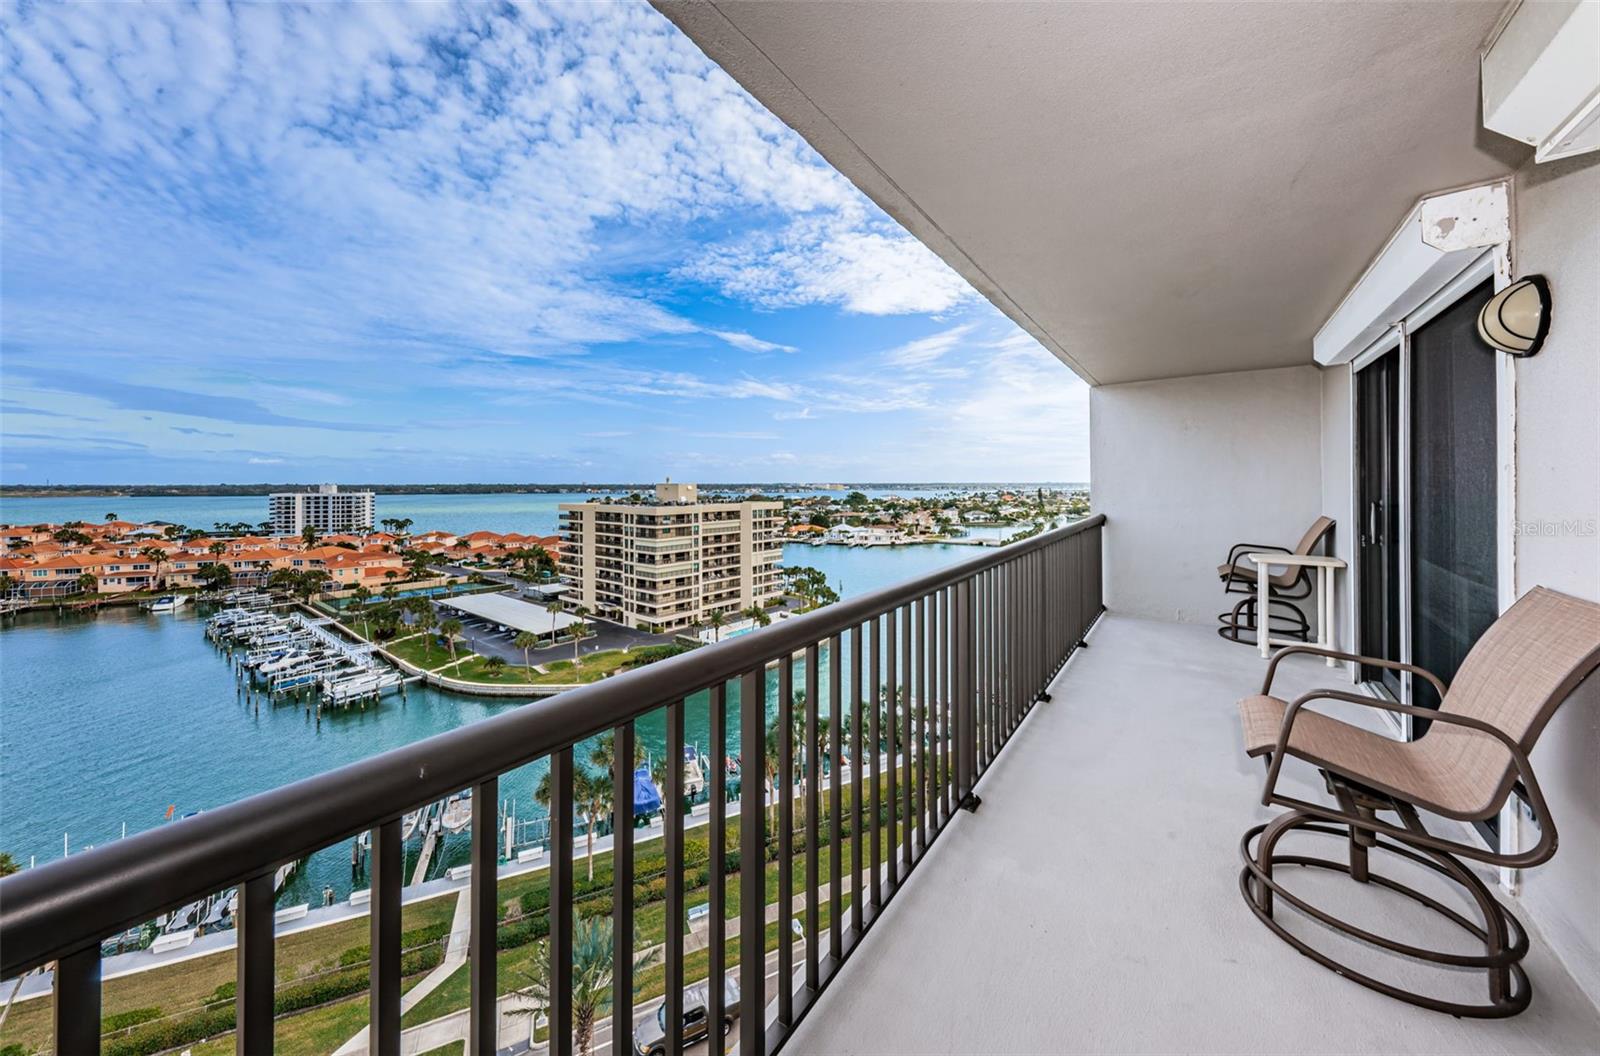 Step out onto the balcony and enjoy views of the Marina & Intracoastal Waterway